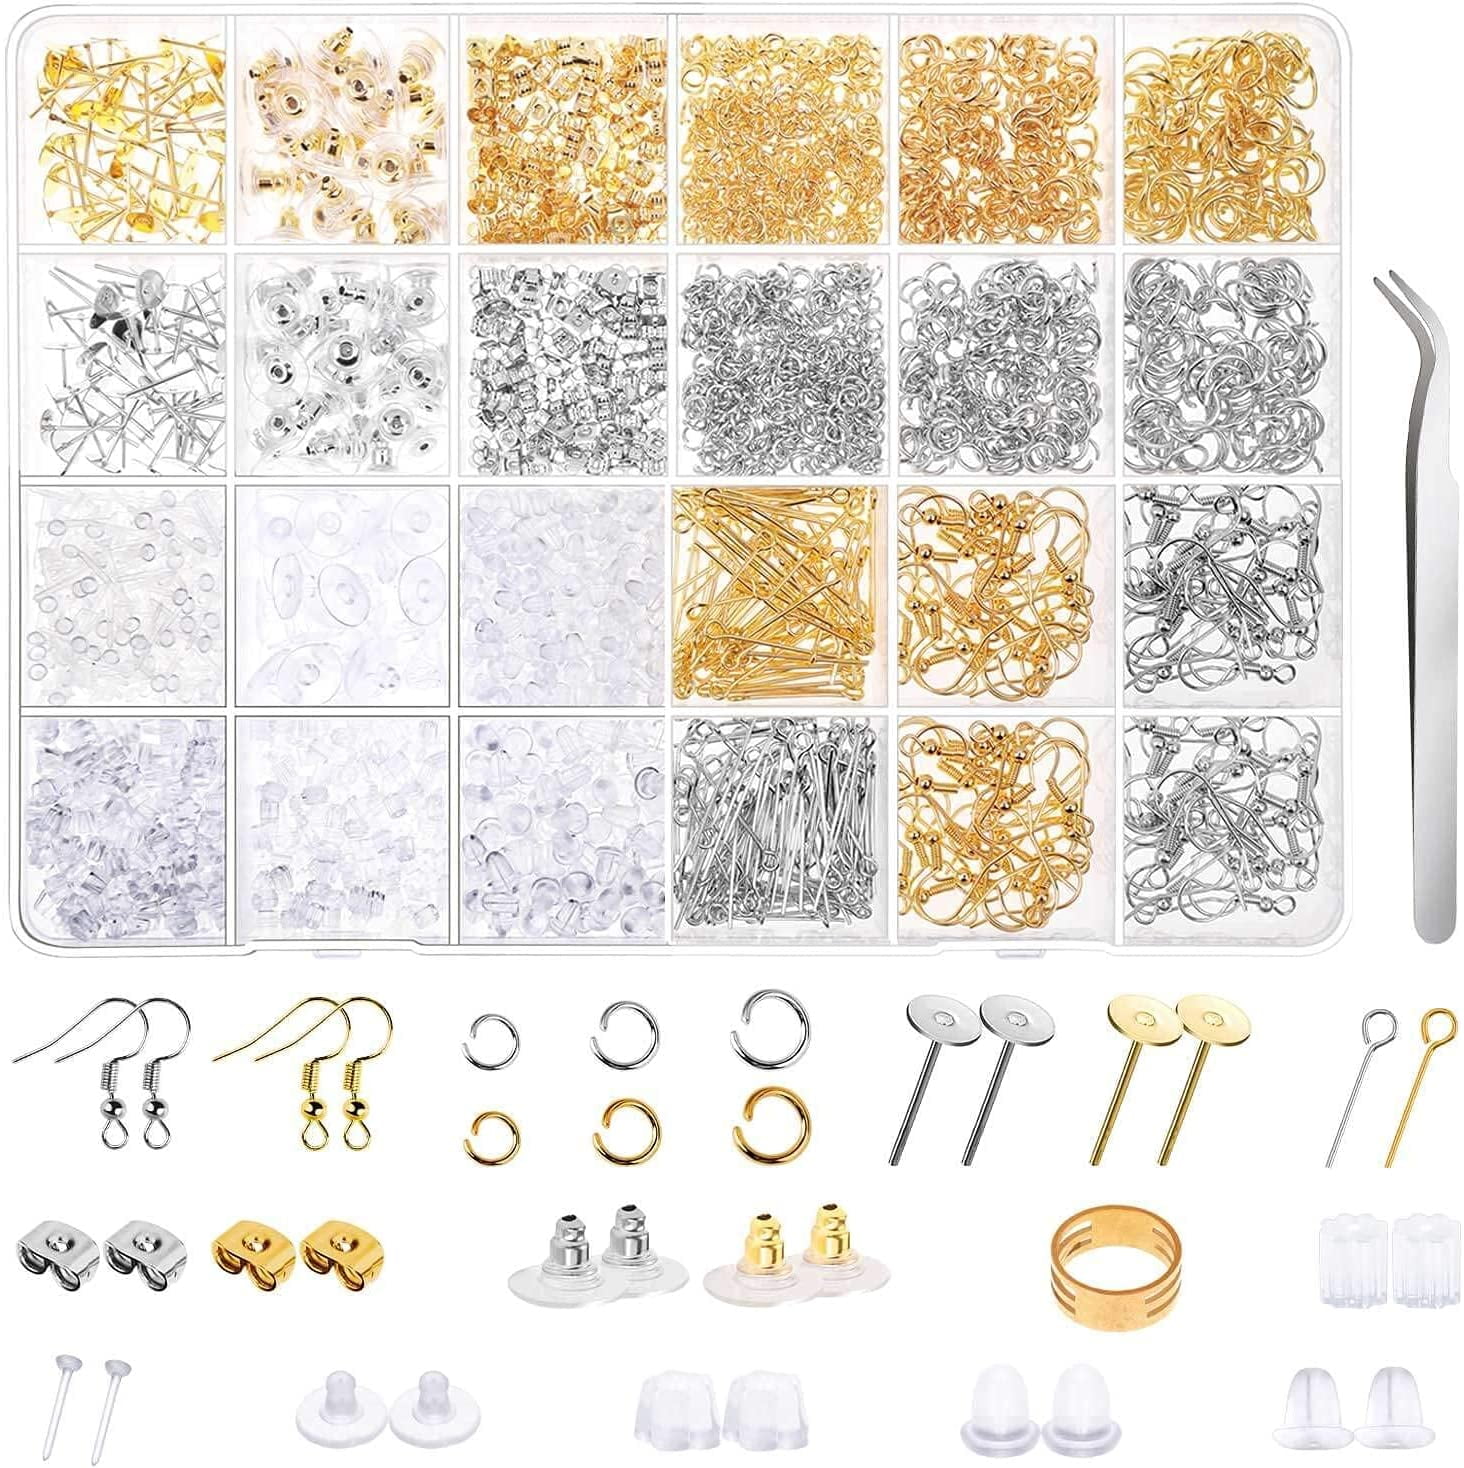  XKCWXY 415Pcs Earring Making Kit with Beading Hoop Earring  Finding Component Accessories,Earring Hooks,Jump Rings,Earring  Backs,American Flag Charms,Round Letter Beads for Jewelry Making DIY Craft